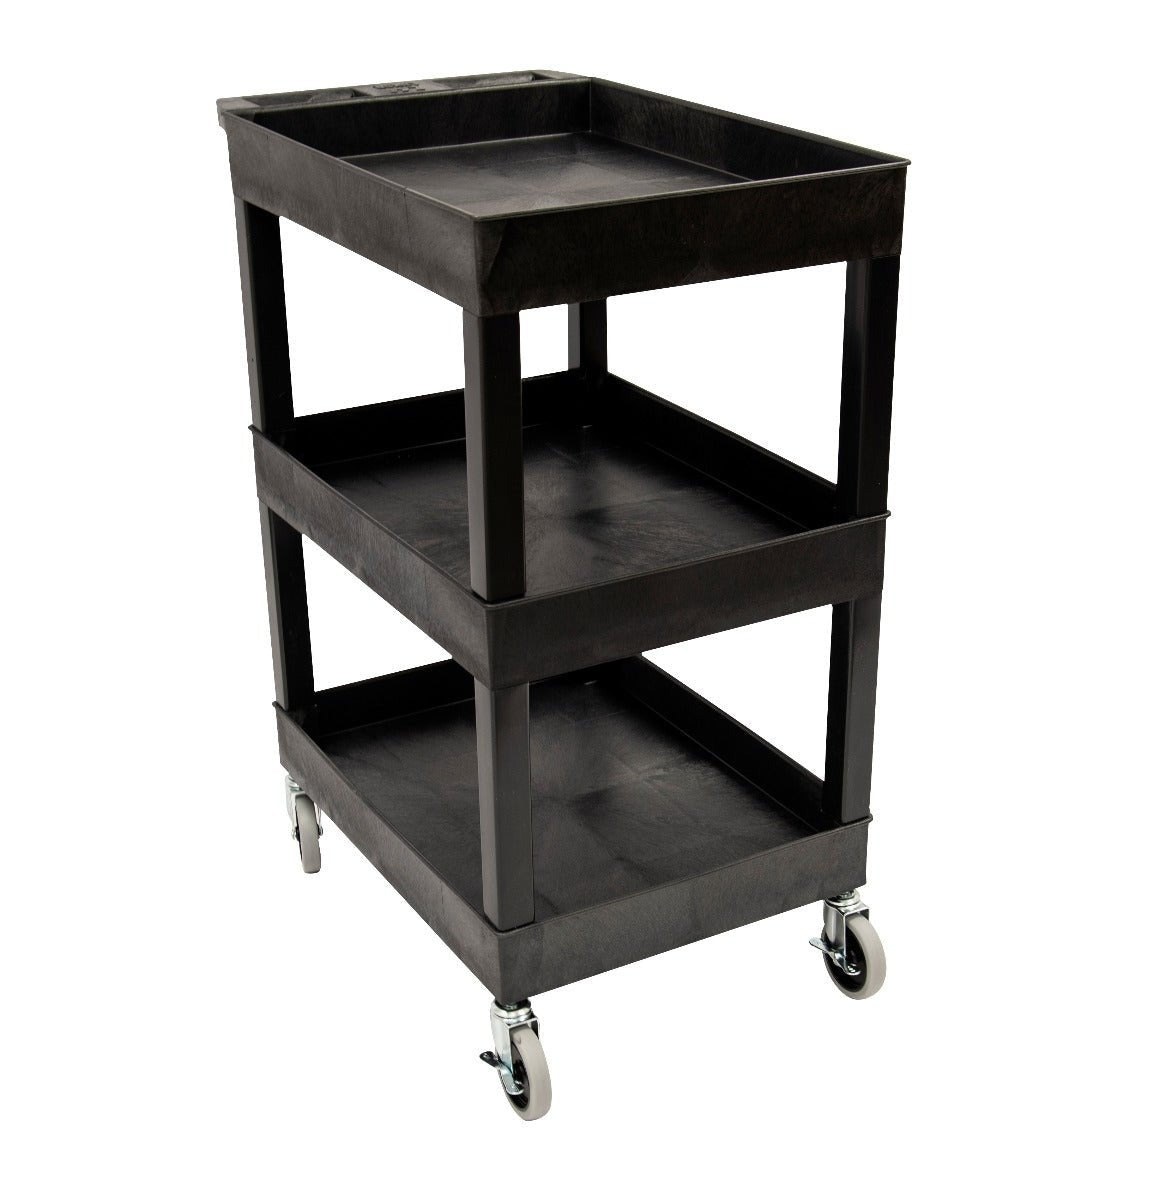 Luxor 24" x 18" Plastic Utility Tub Cart - Three Shelves with Outrigger Utility Cart Bins (Luxor LUX-SEC111-B-OUTRIG) - SchoolOutlet